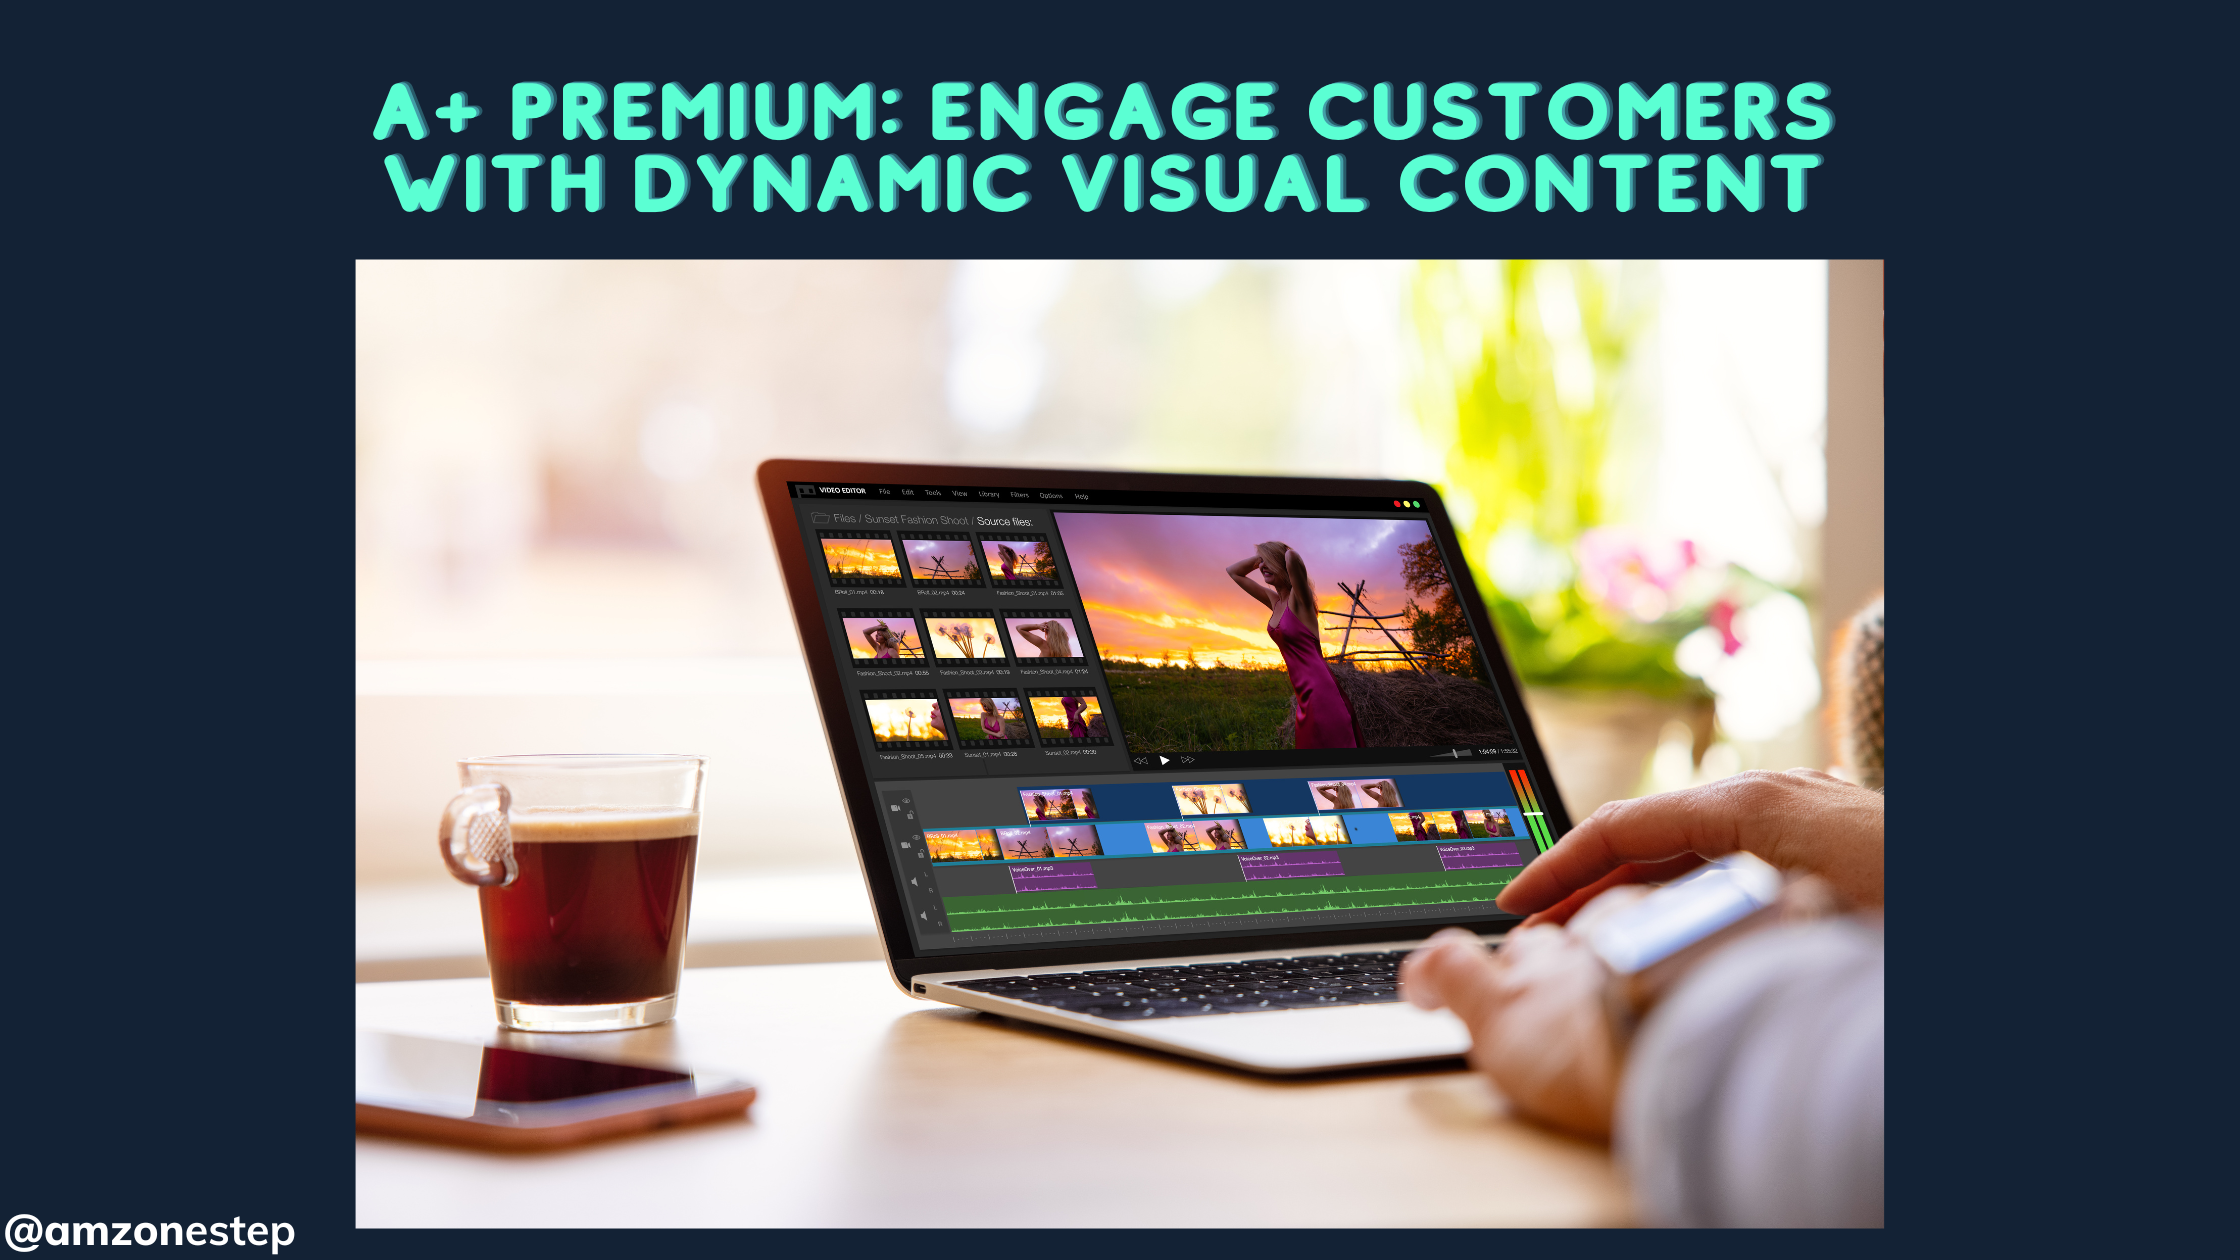 A+ Premium: Engage Customers with Dynamic Visual Content